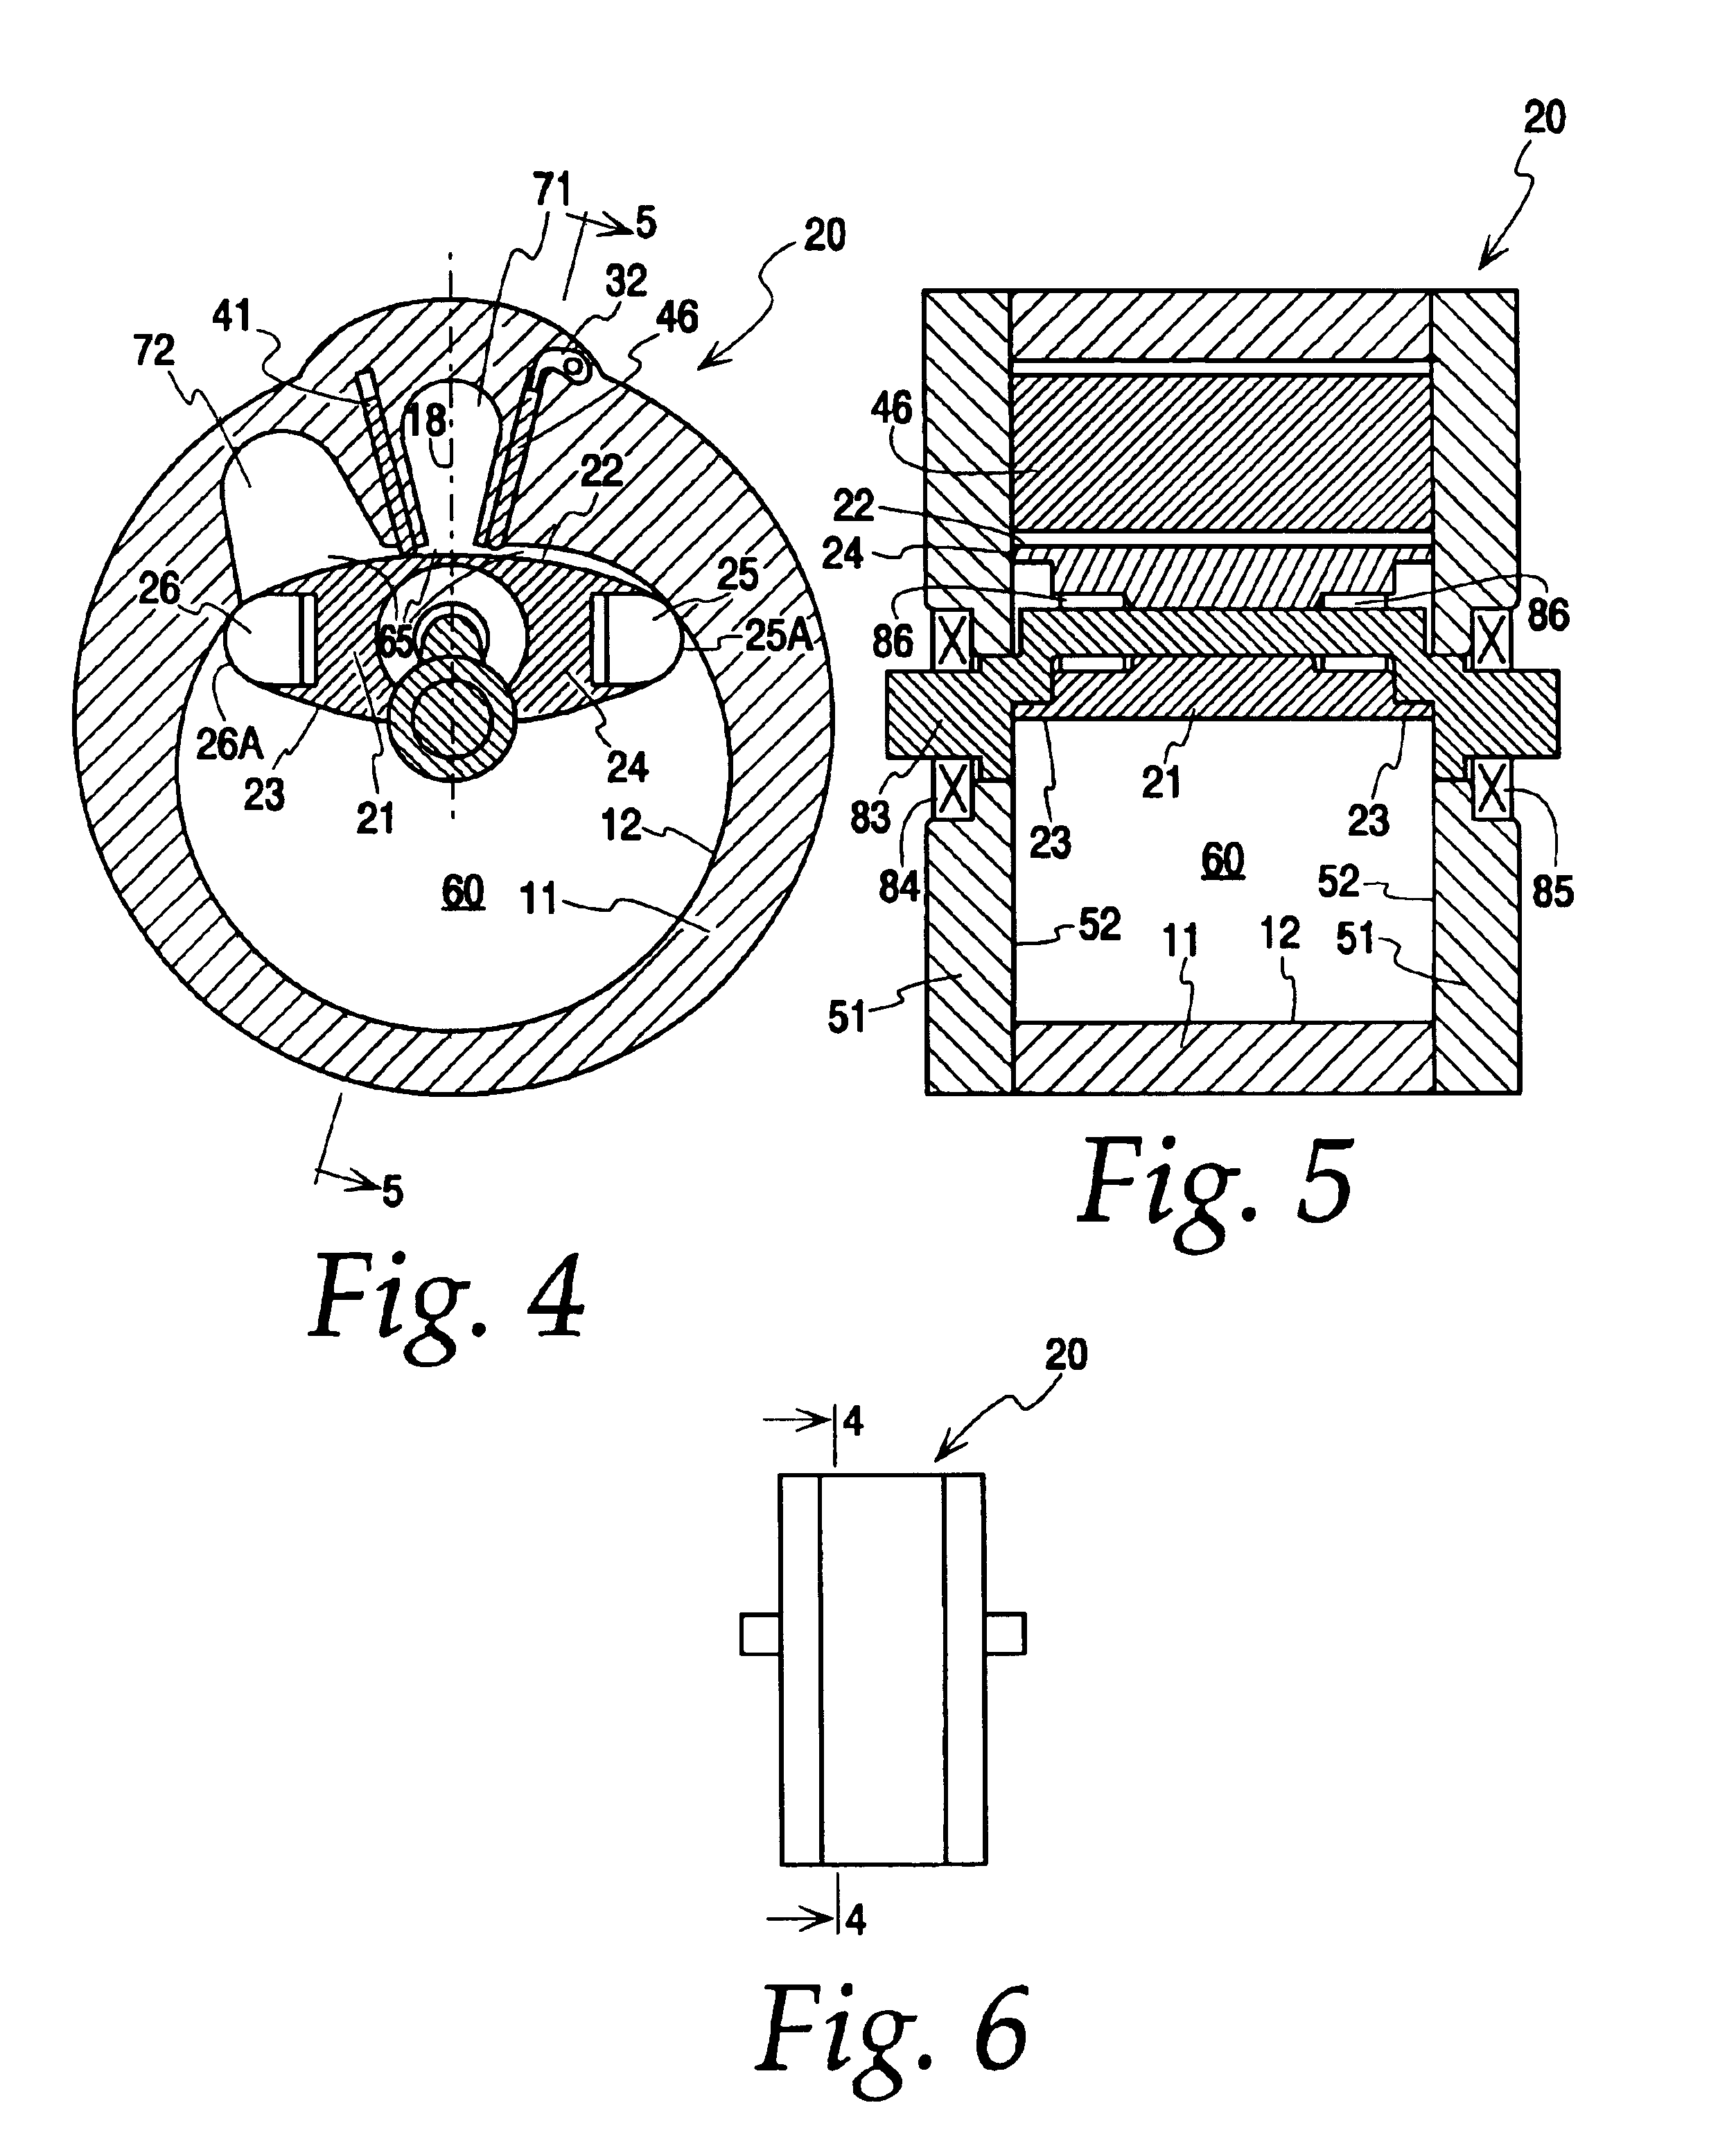 Rotary machine housing with radially mounted sliding vanes